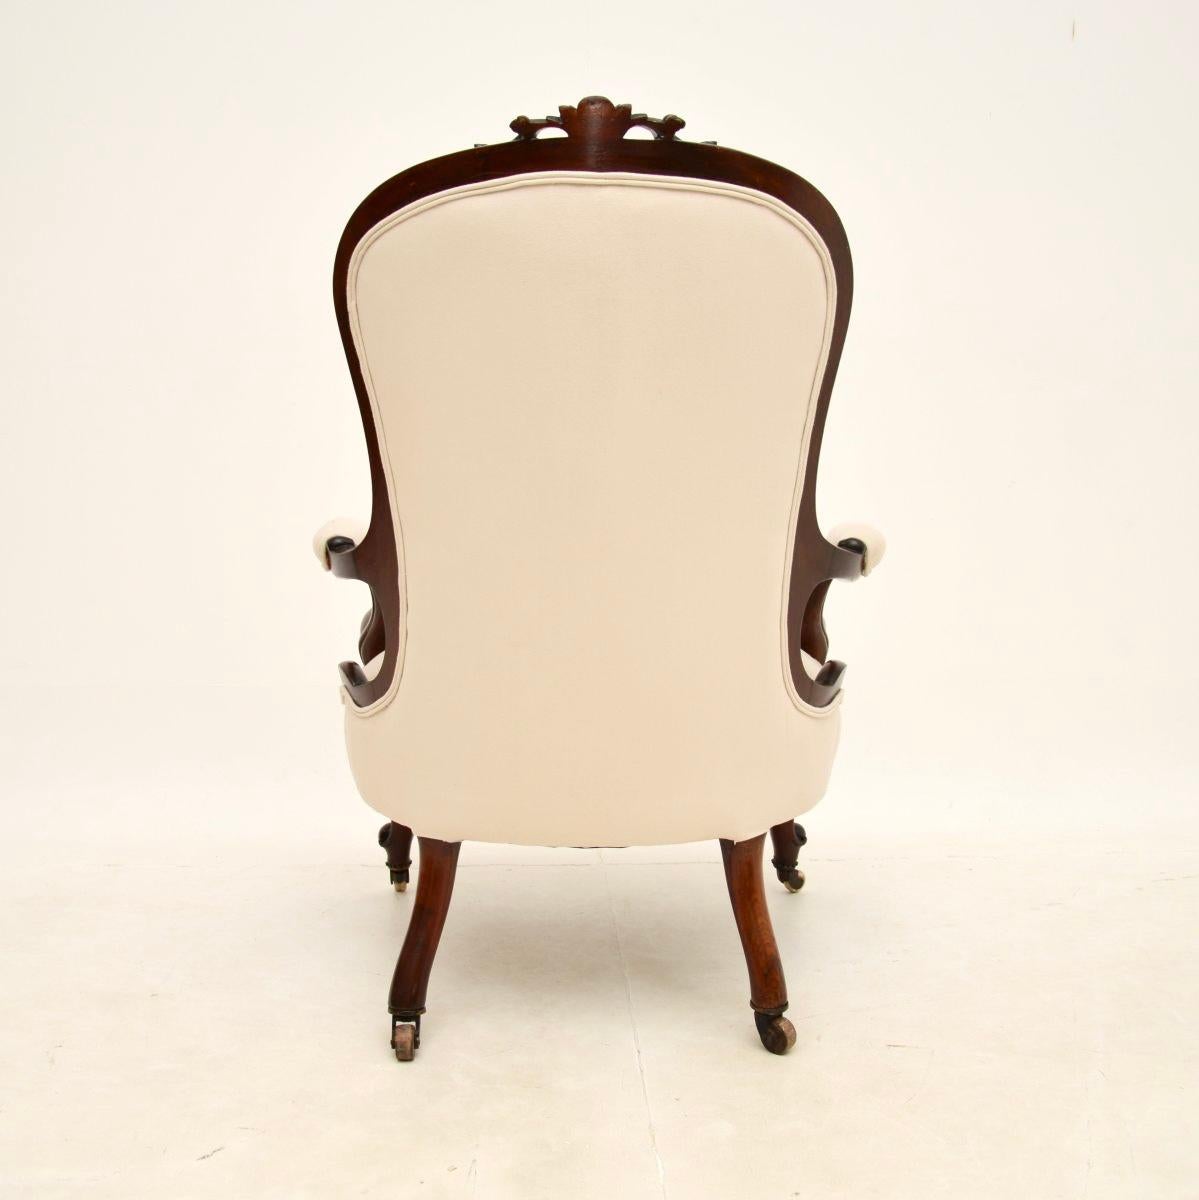 Late 19th Century Antique Victorian Spoon Back Armchair For Sale